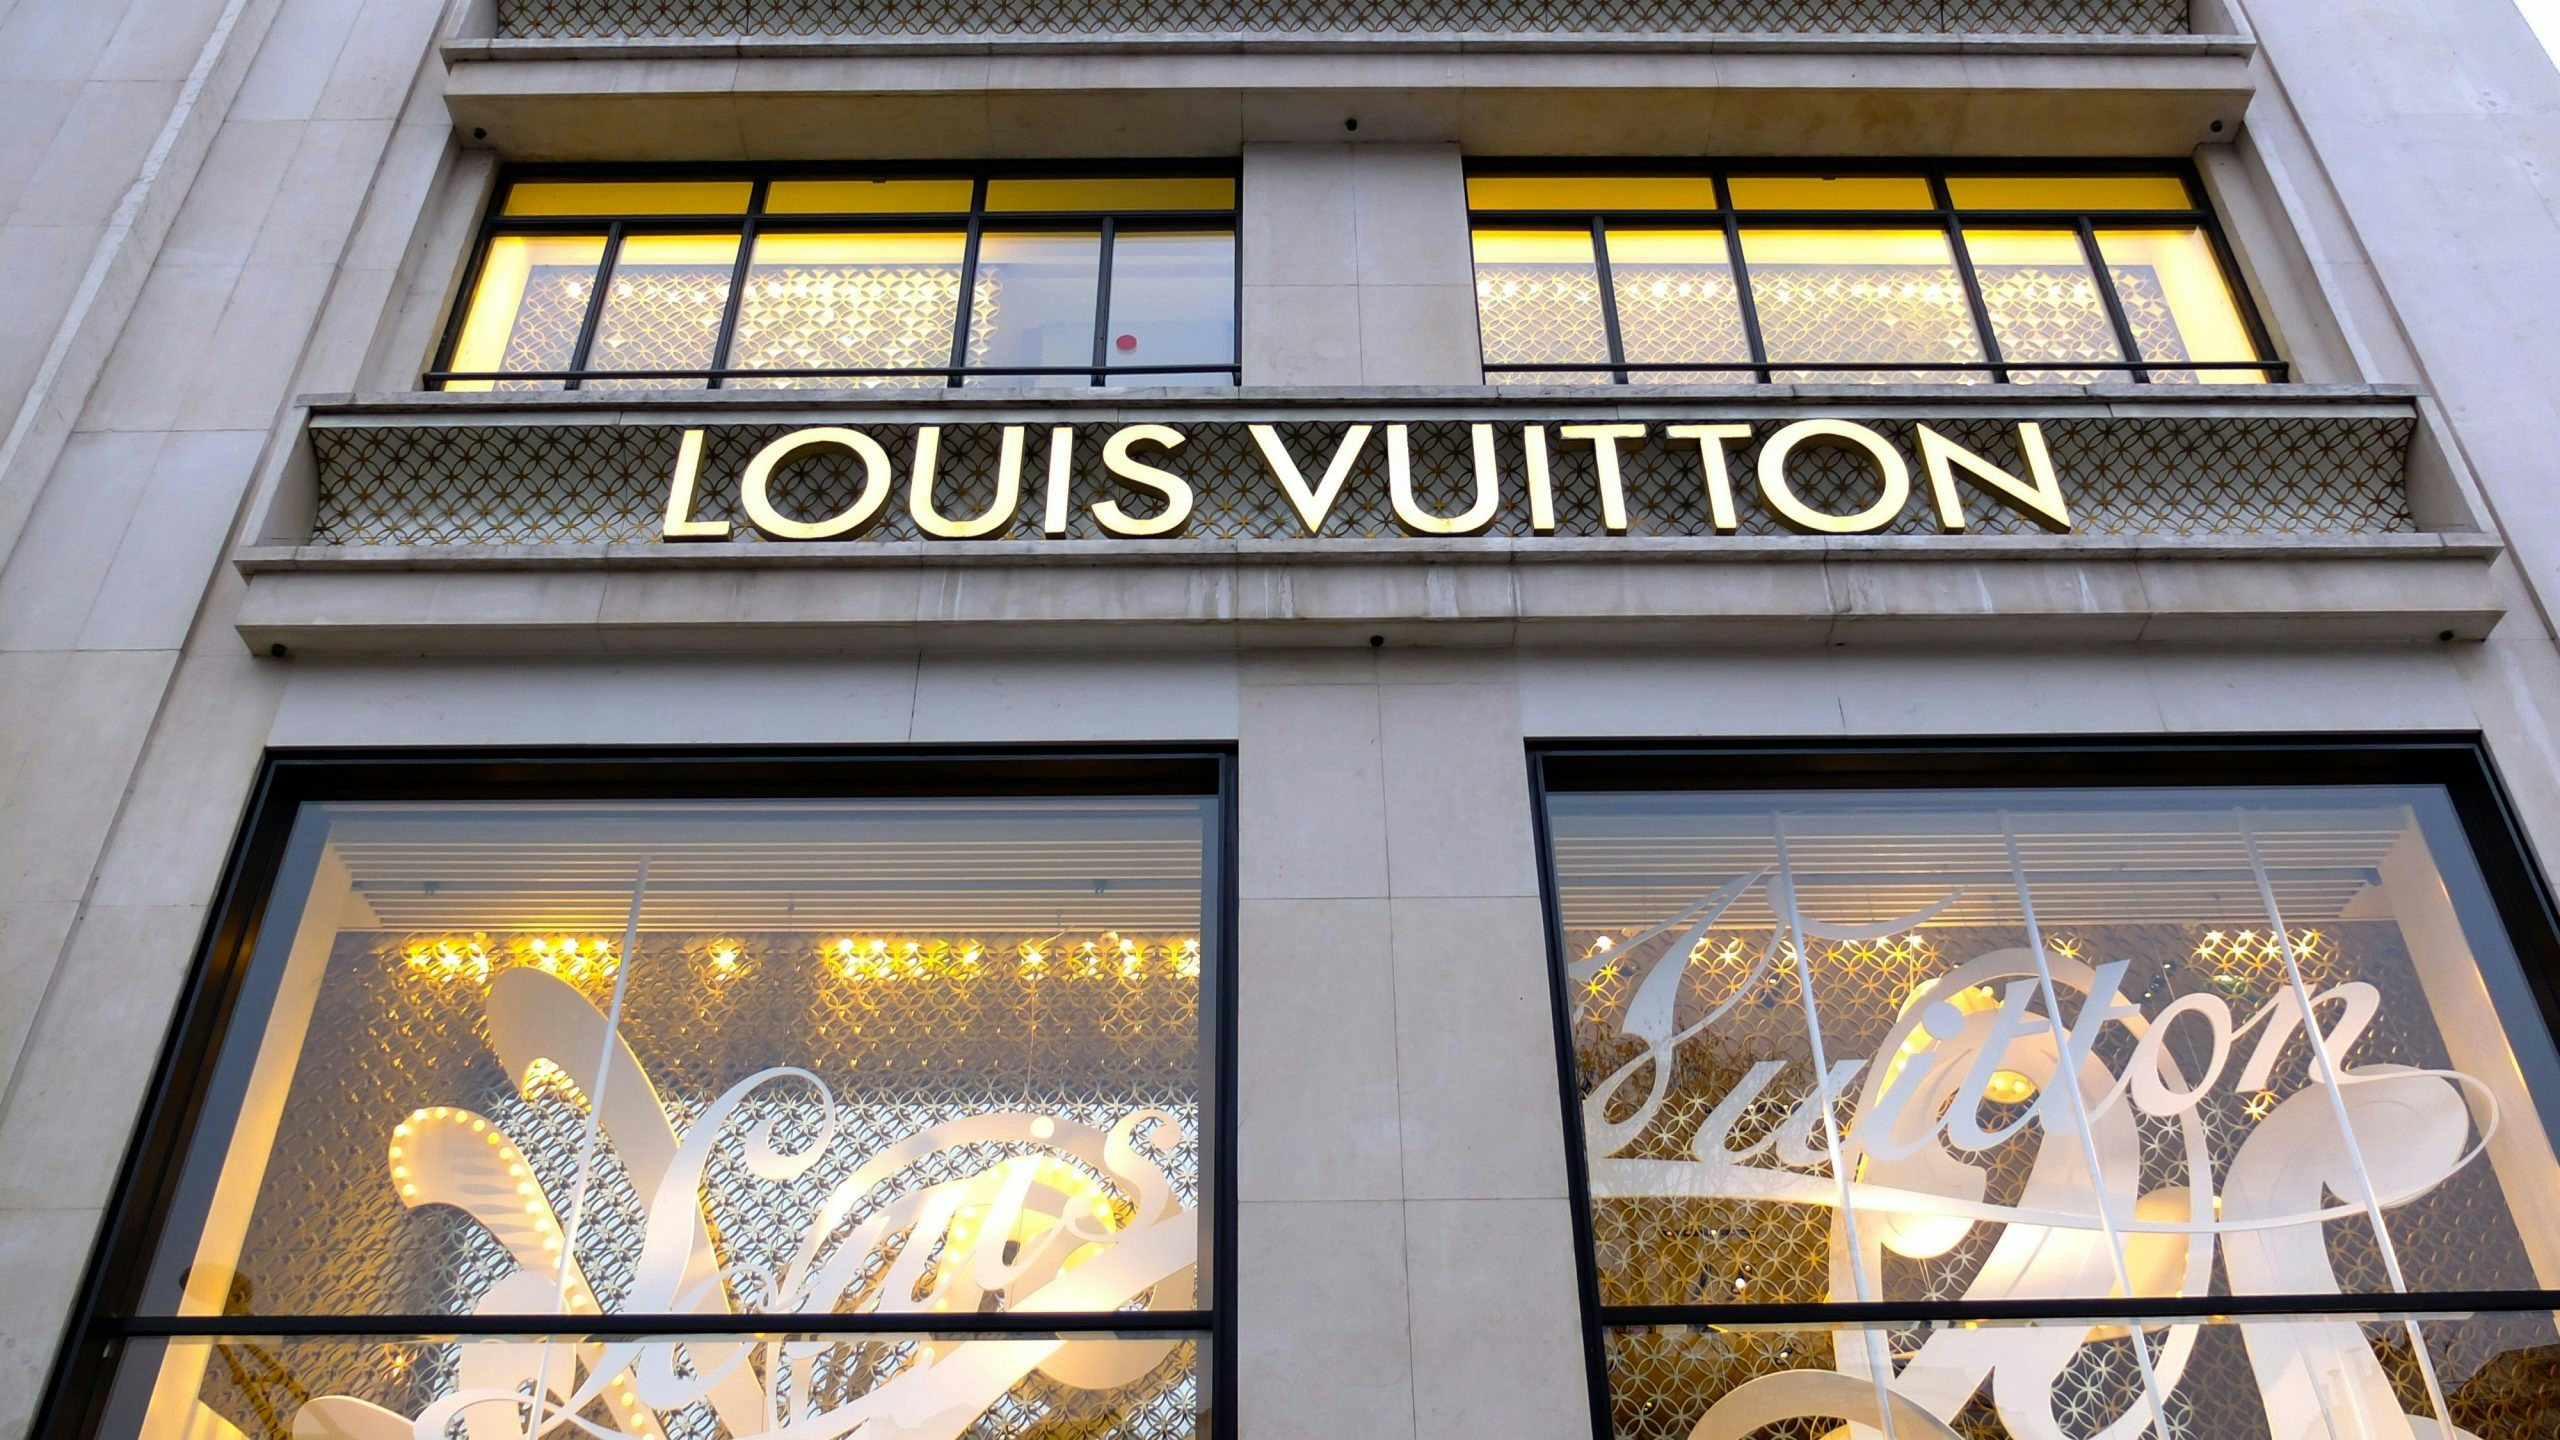 Demonstrators against France’s new retirement age vented their anger at LVMH after the luxury conglomerate’s share price hit a record high. Photo: Shutterstock